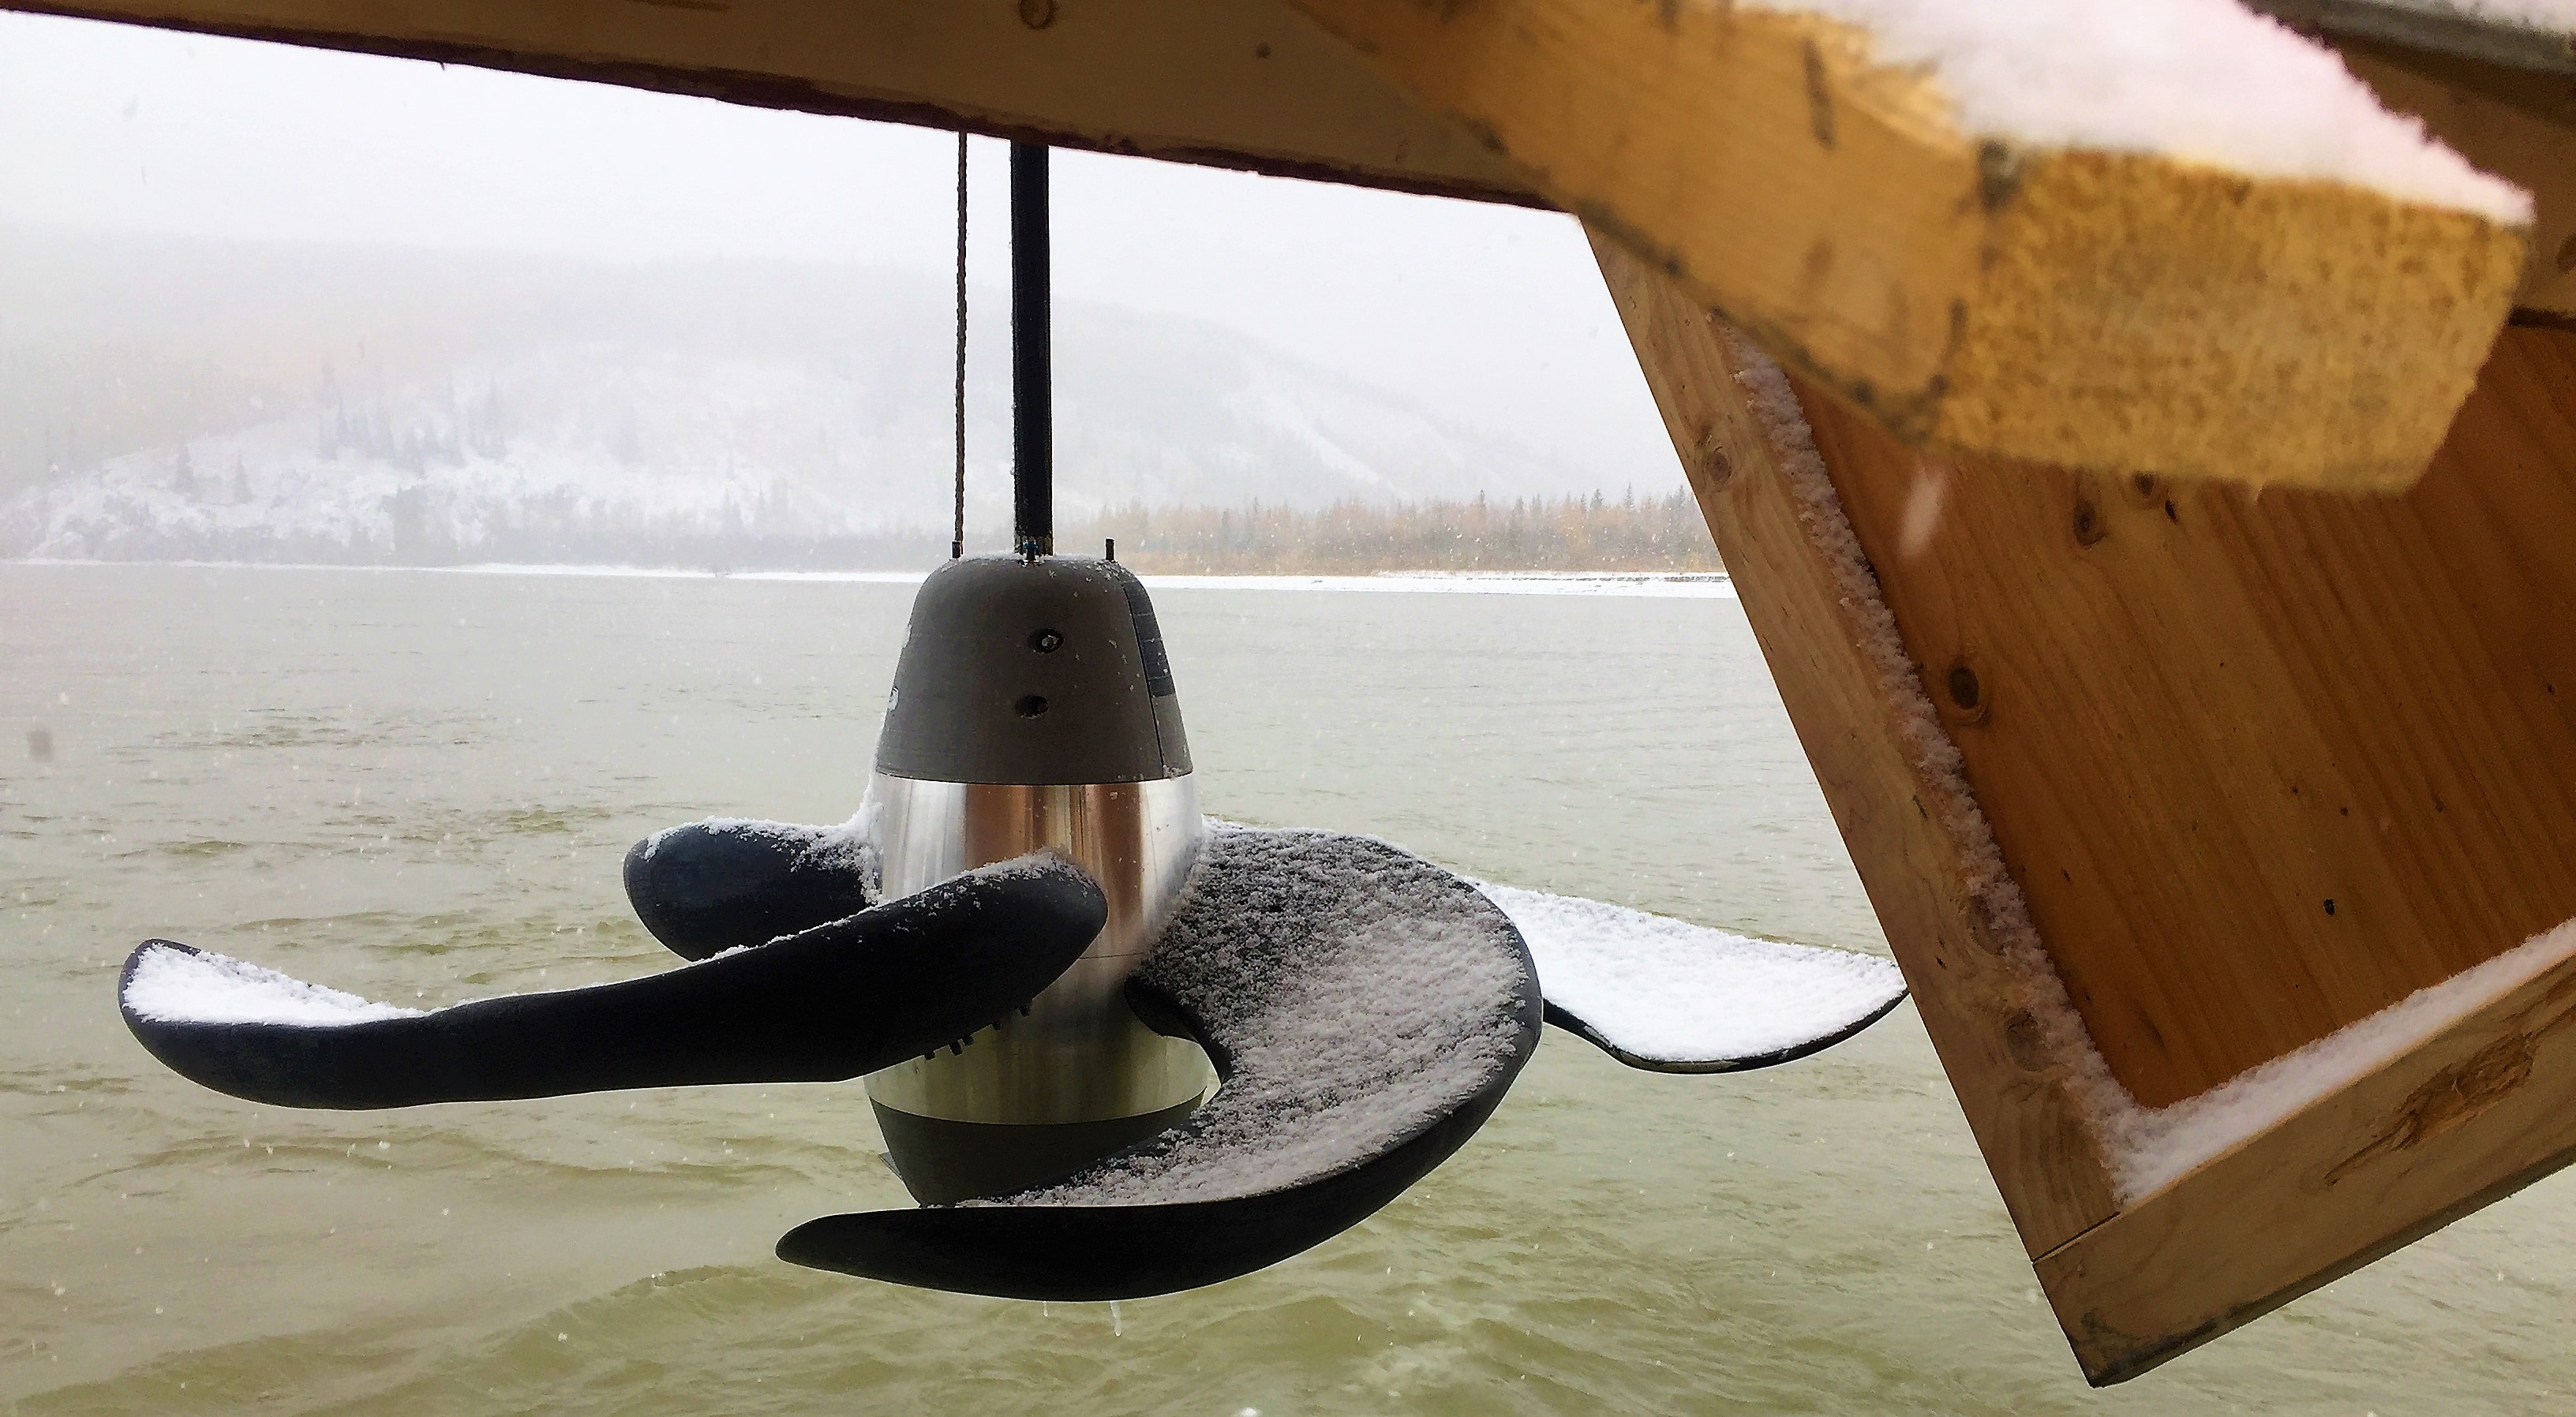 BladeRunner Launches First Prototype in Alaska under SHARKS